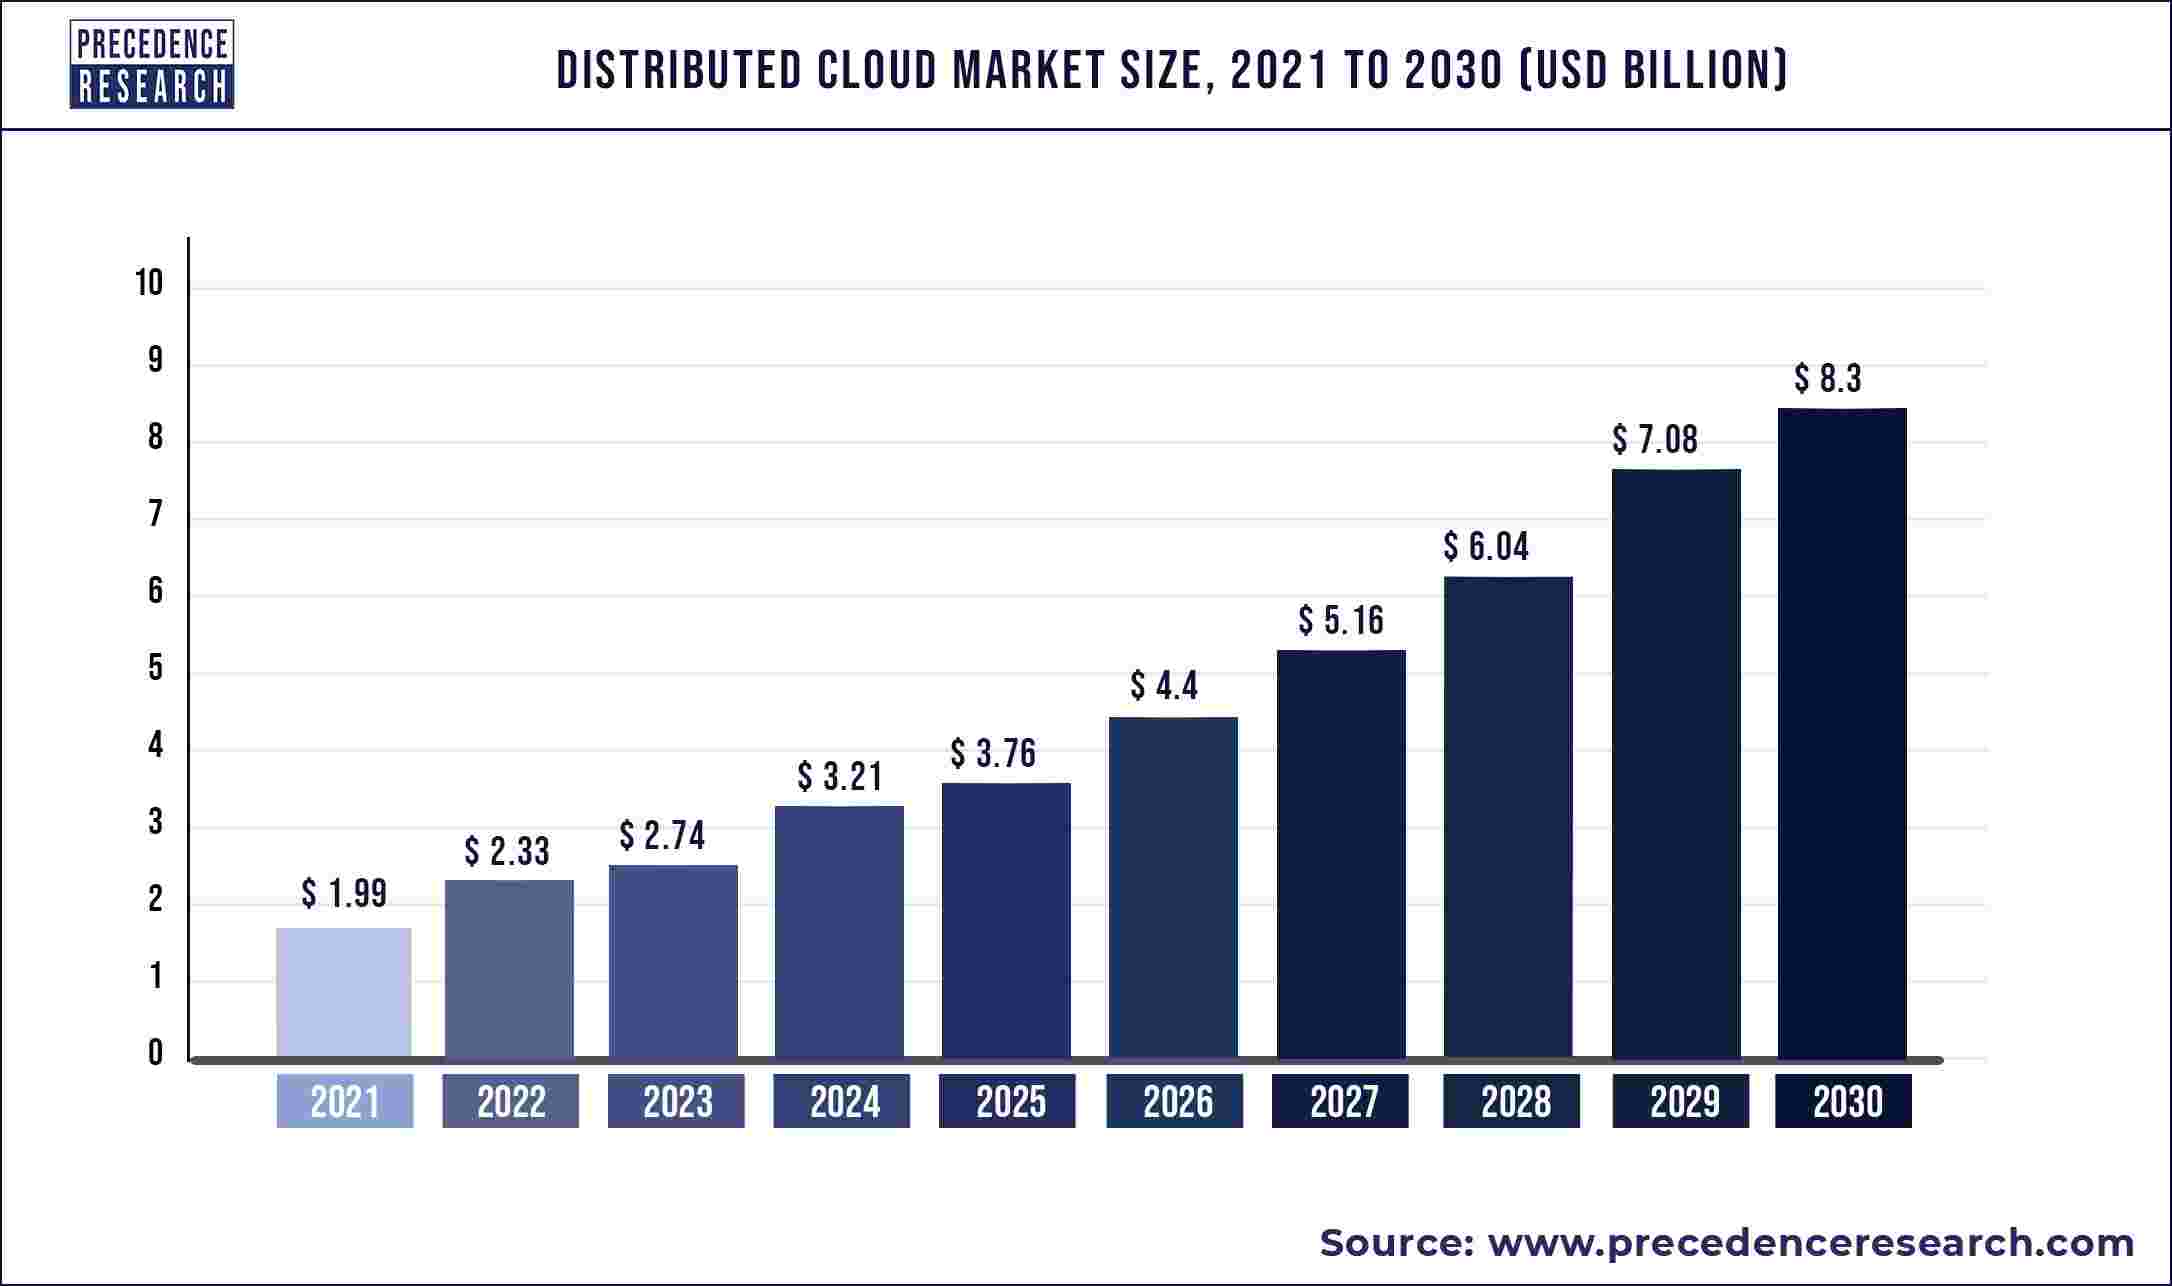 Distributed Cloud Market Size is Forecasted to Reach US$ 8.3 Billion by 2030